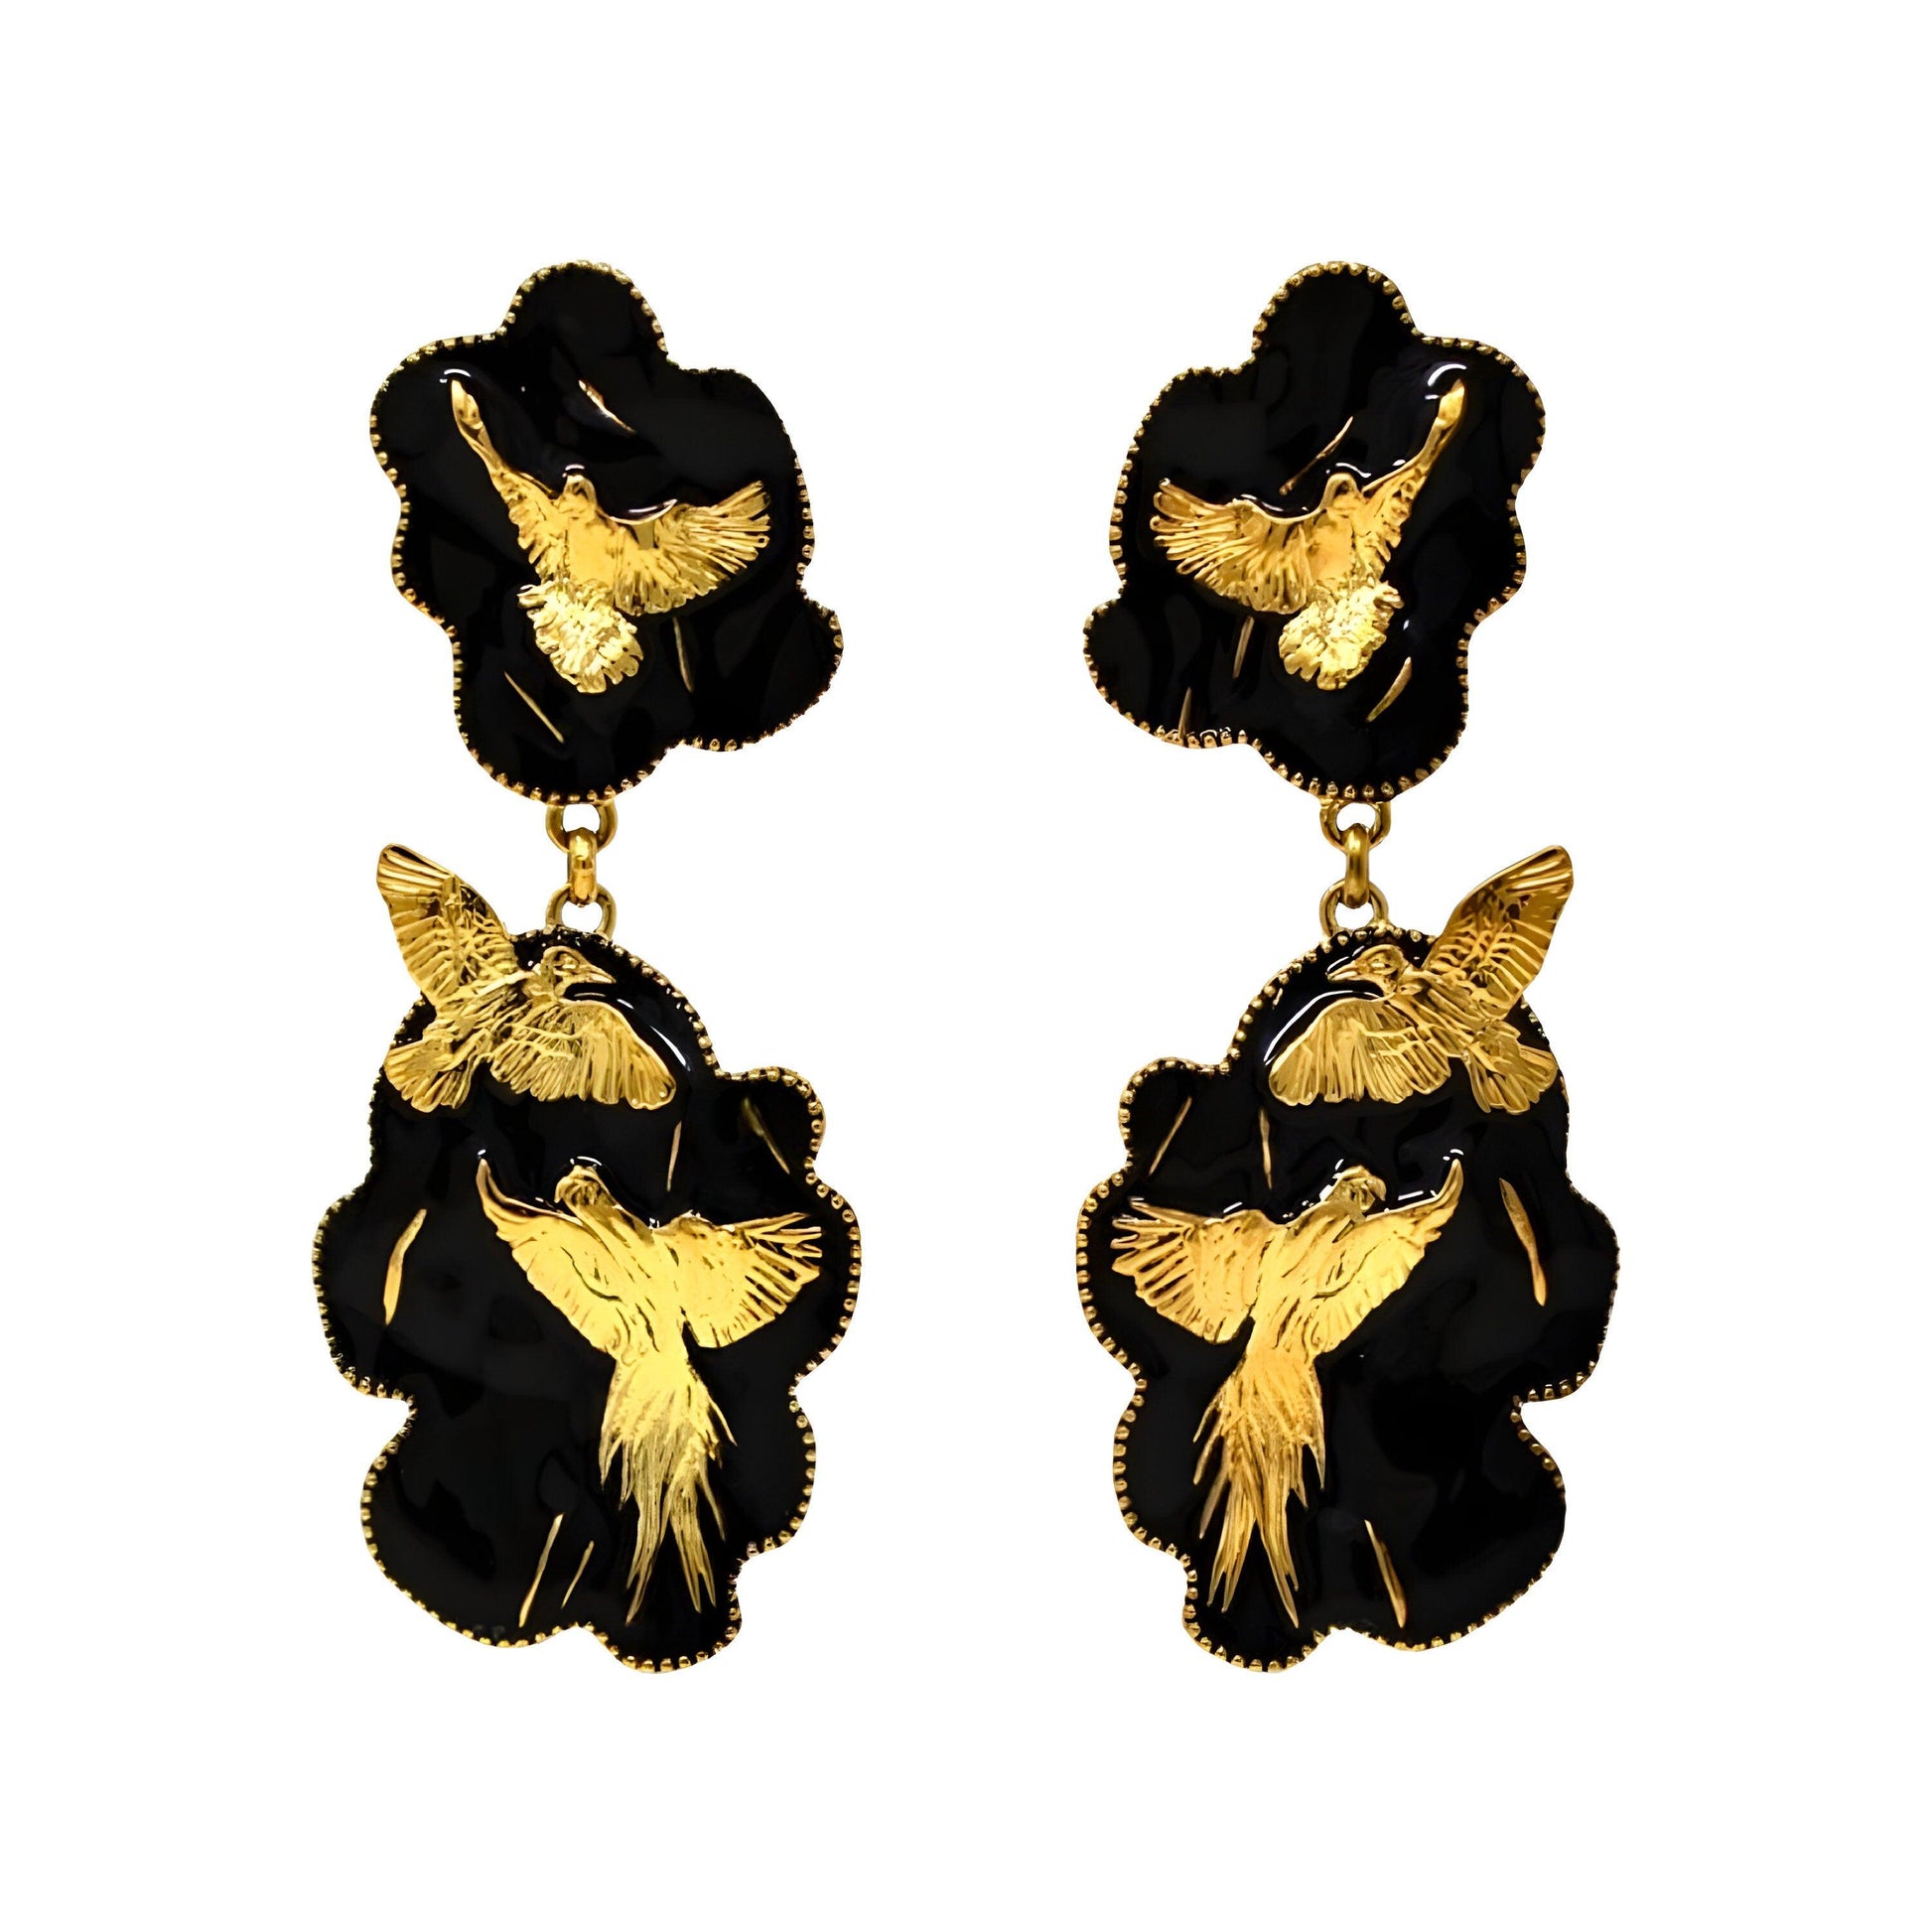 Unique Earrings "Arise" - Gold & Black Jewelry, Gift, Gift for Mom, Artistic